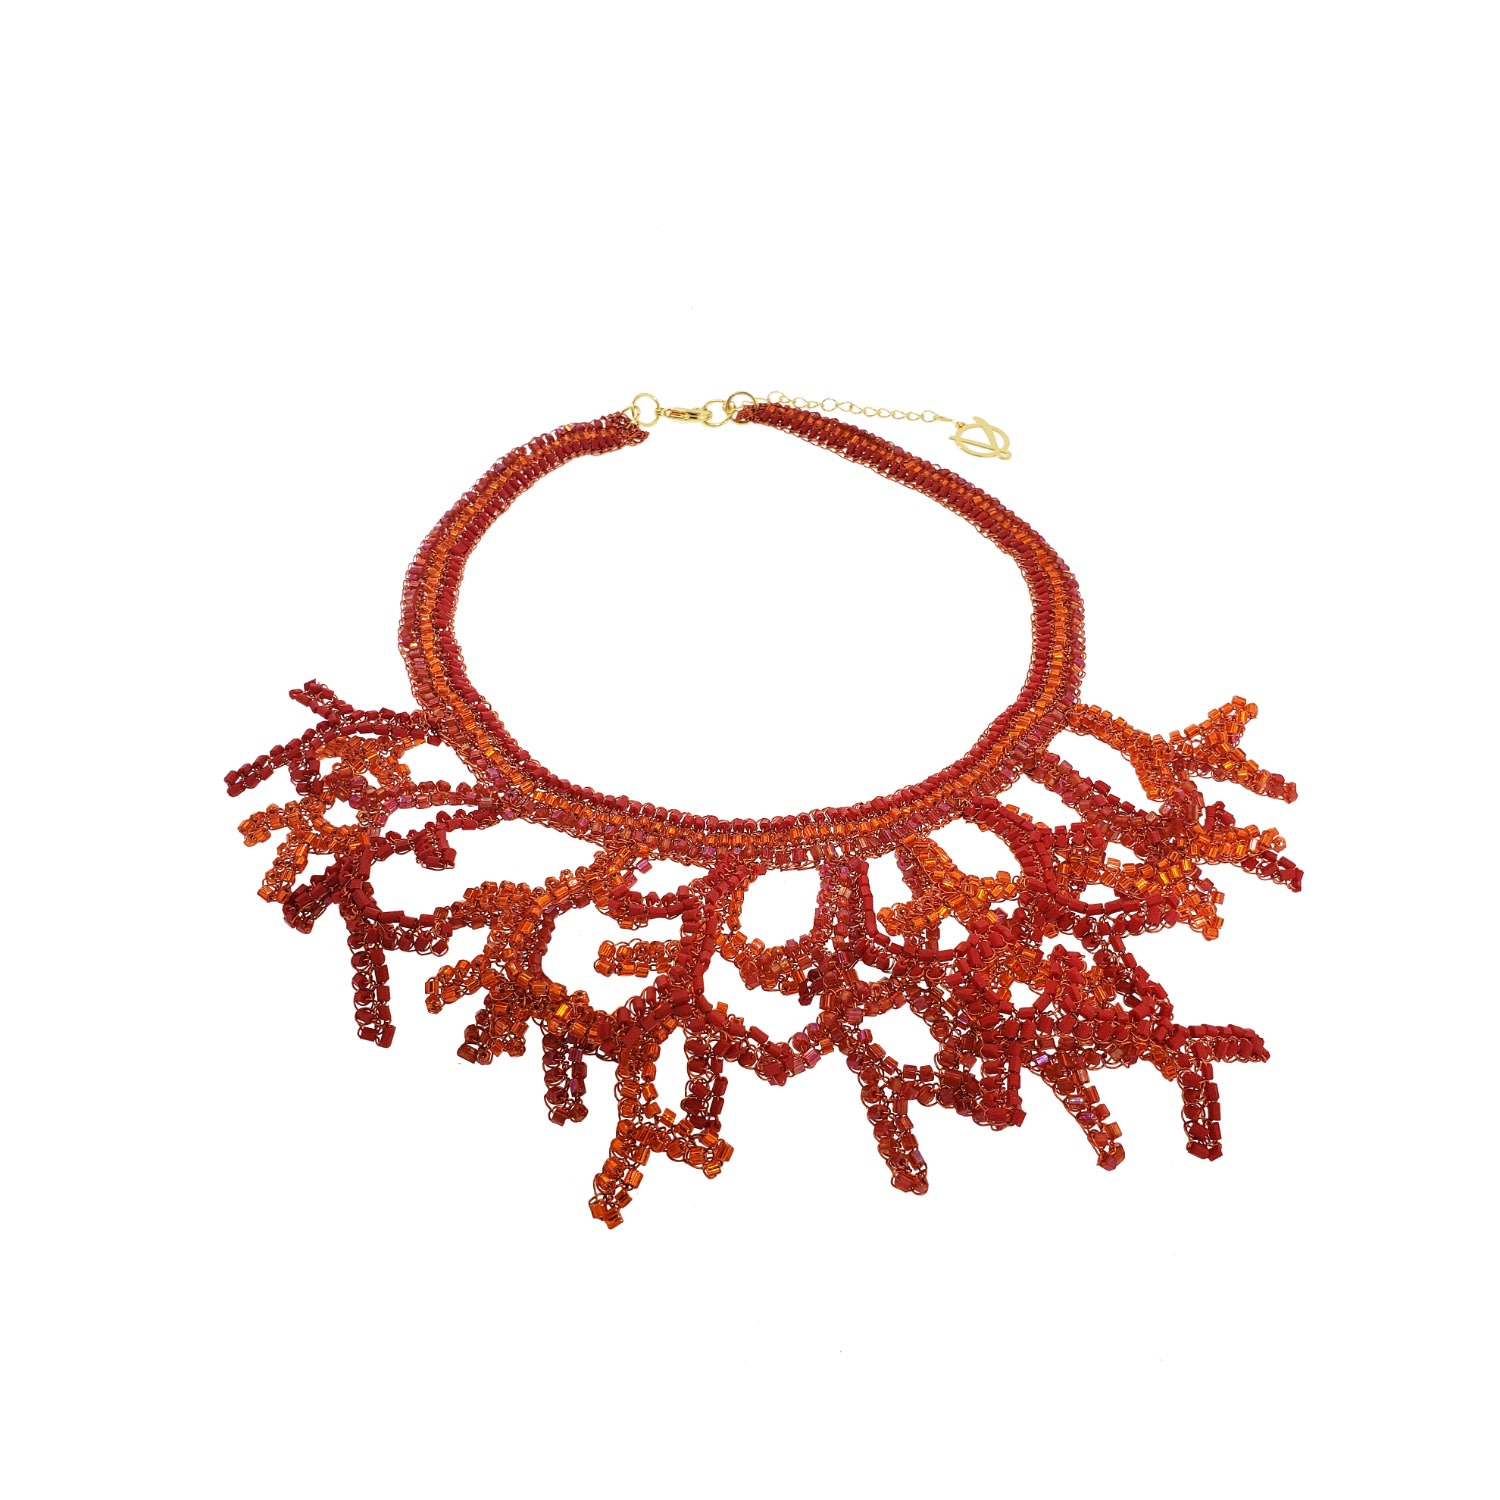 Lavish By Tricia Milaneze Women's Gold / Red Coral Handmade Coral Mix Crochet Necklace